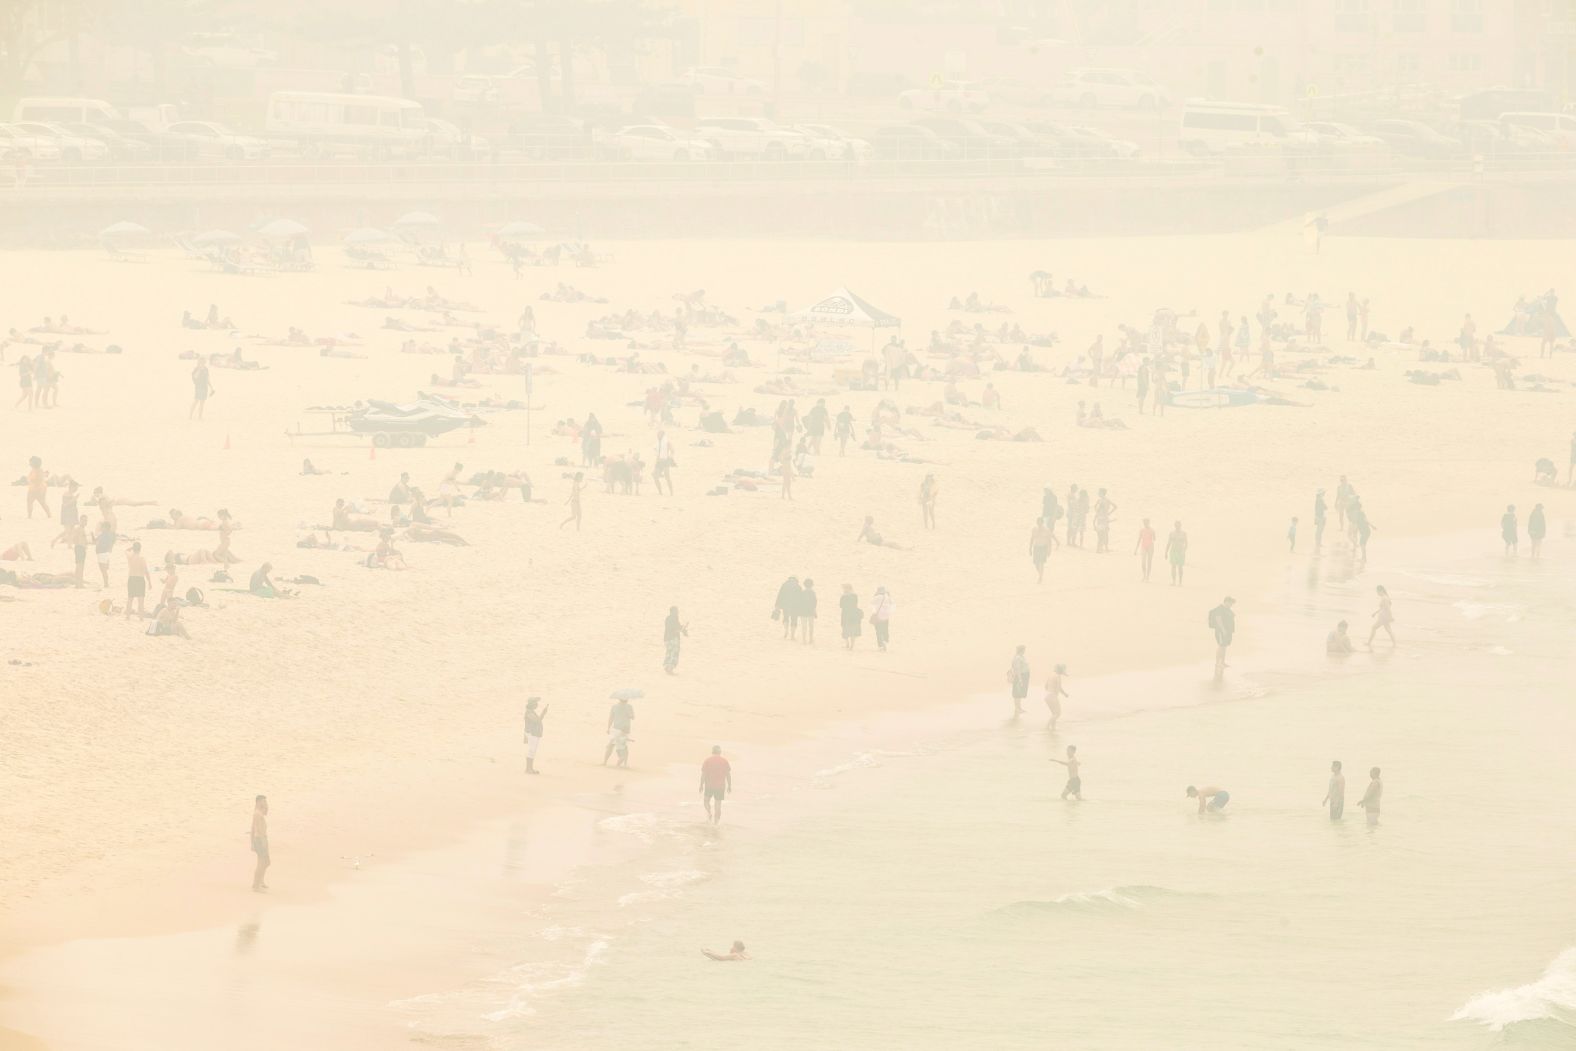 A smoke haze blankets Bondi Beach as the air quality index reaches higher than ten times hazardous levels in some suburbs of Sydney on December 10.